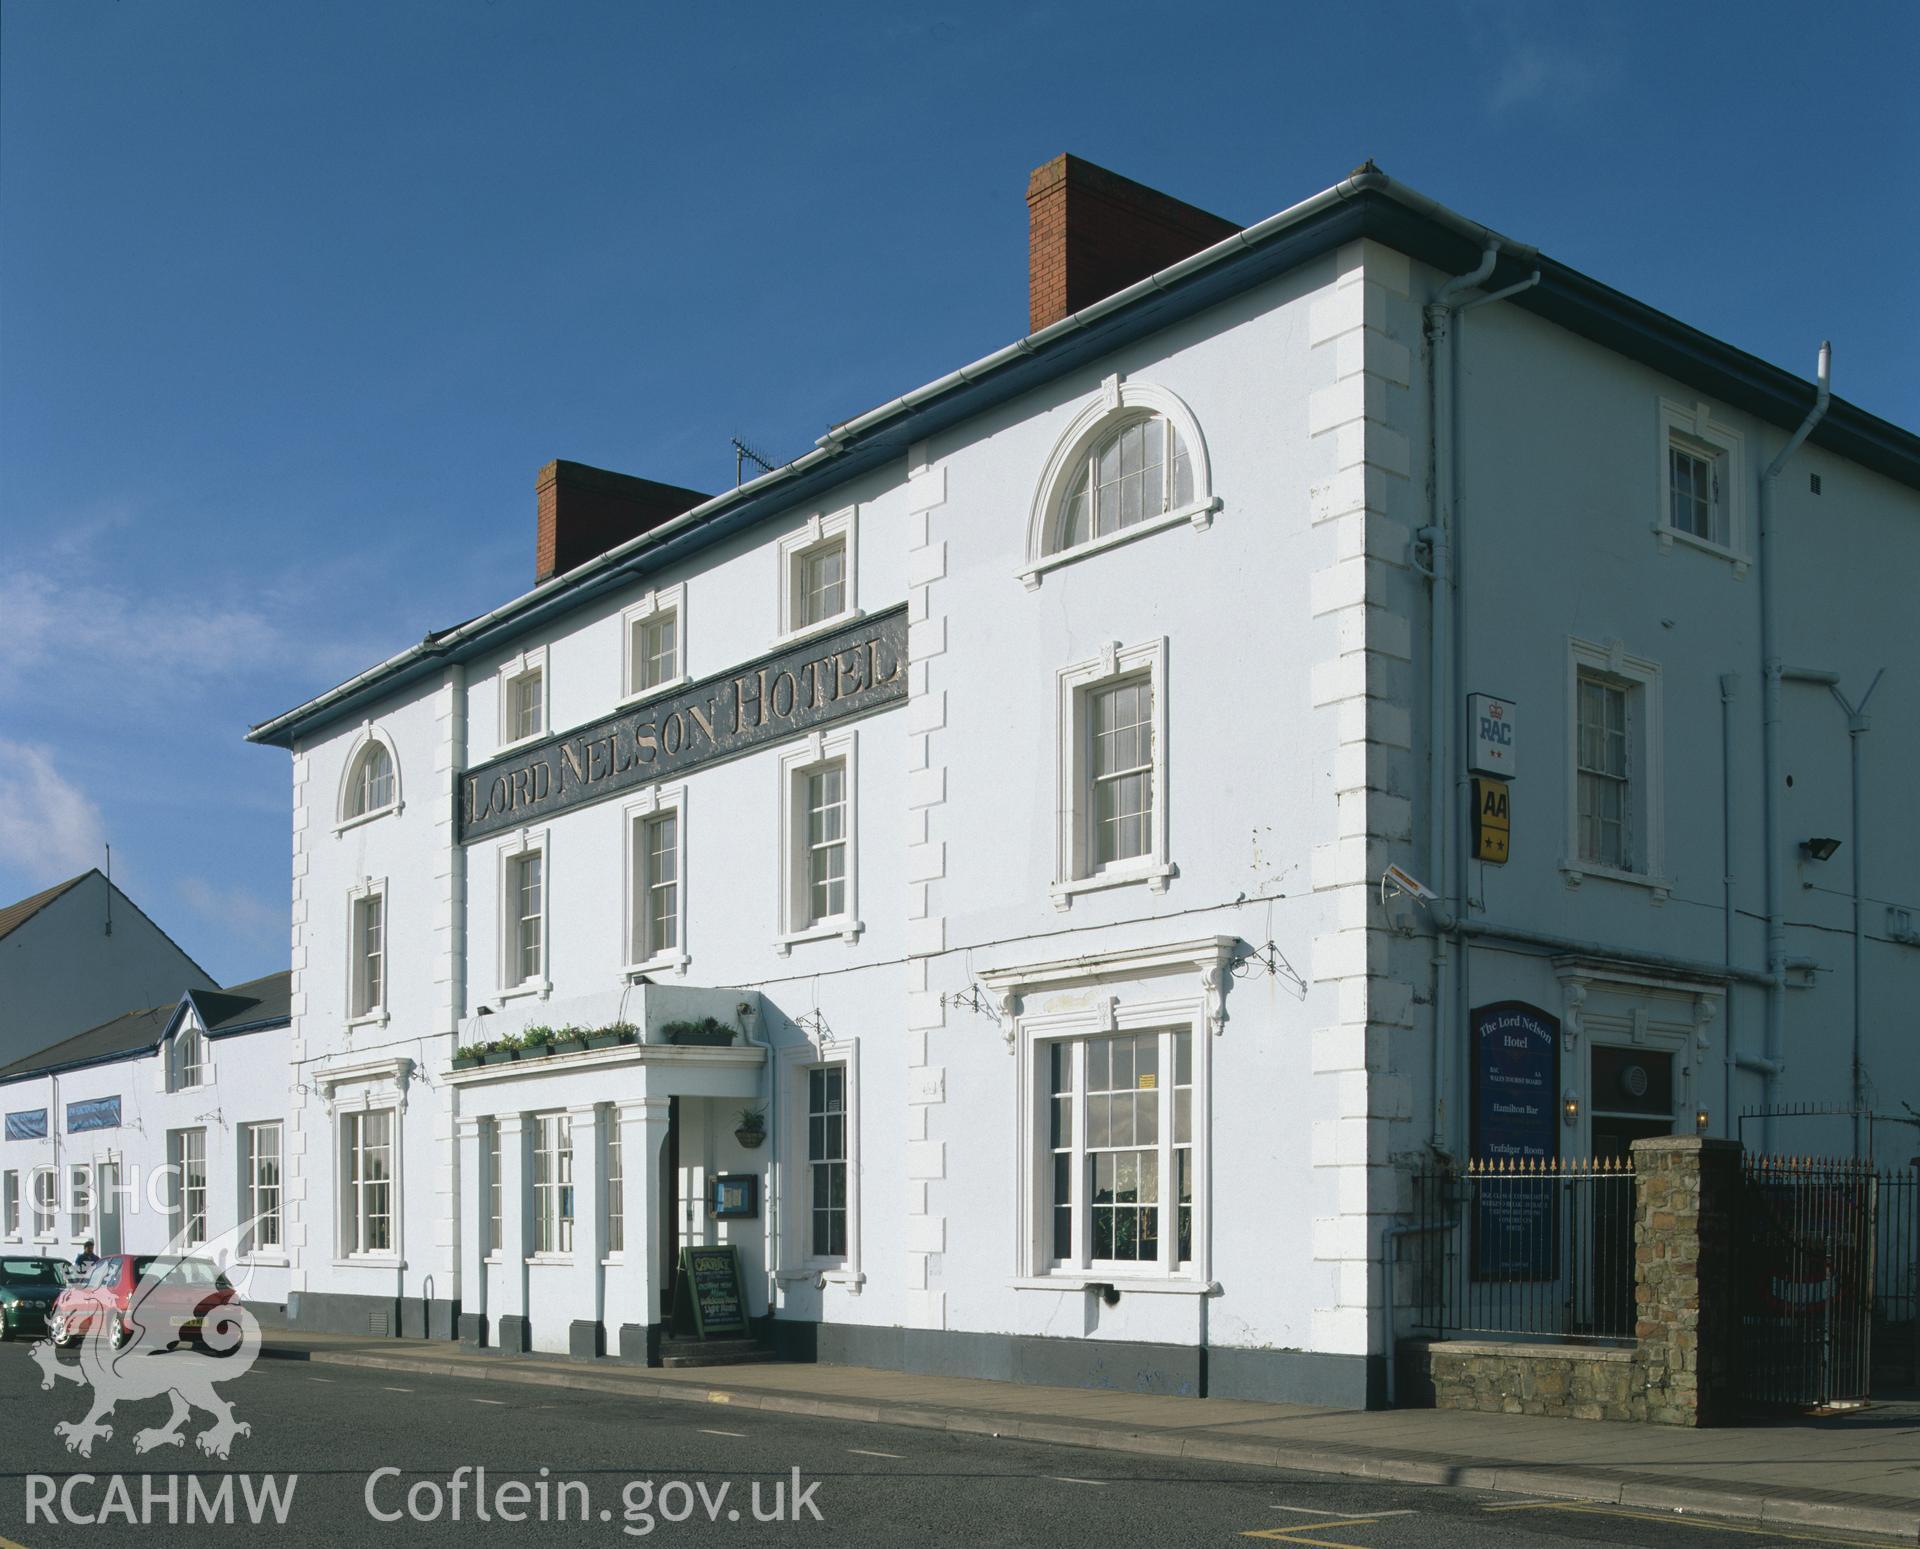 RCAHMW colour transparency showing exterior view of the Lord Nelson Hotel, Hamilton Terrace, Milford Haven, taken by Iain Wright, 2003